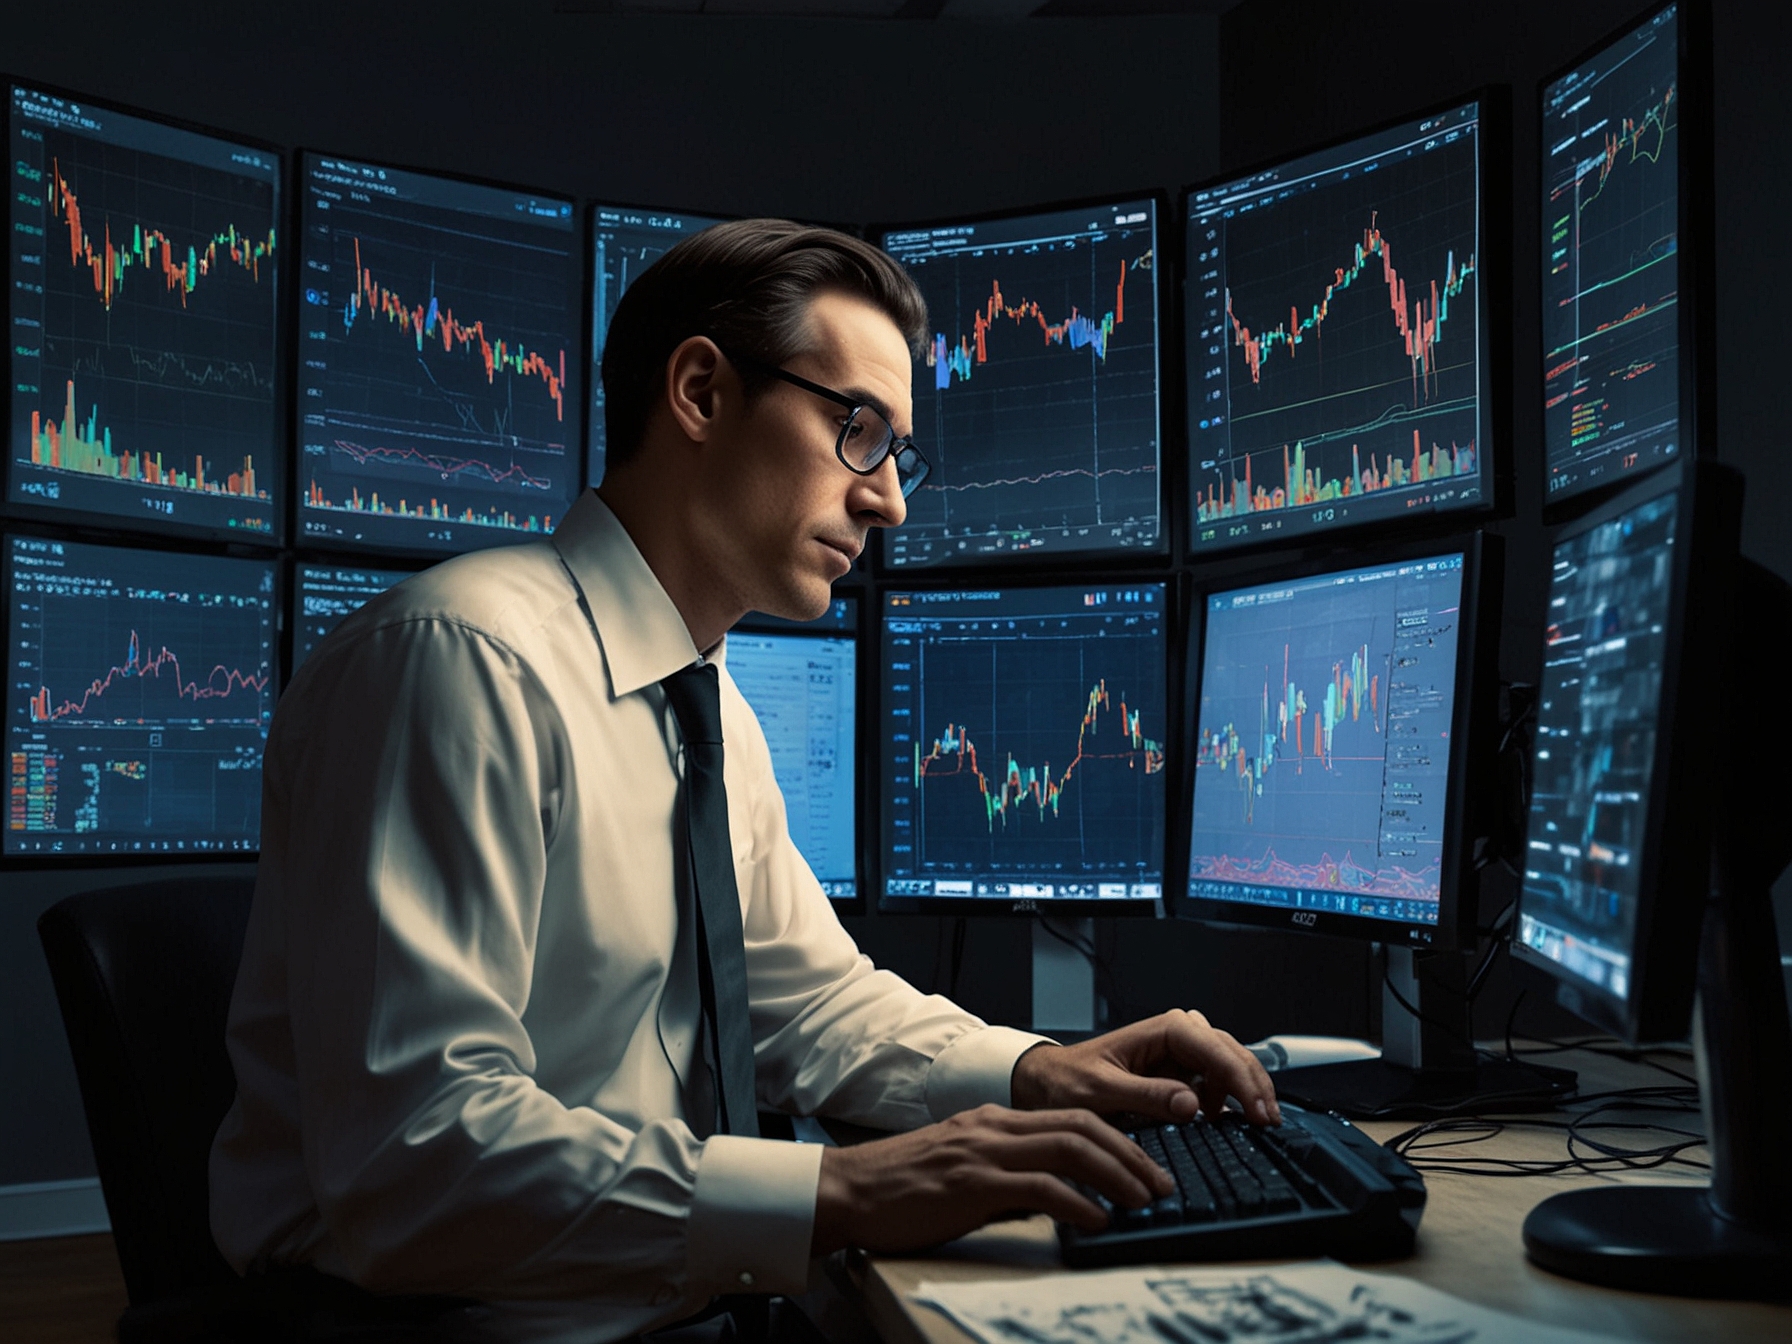 A trader analyzing stock charts on a computer, highlighting key stocks like Titan, LIC Housing Finance, and SAIL, which are expected to offer gains of 4-16% over the next 3-4 weeks.